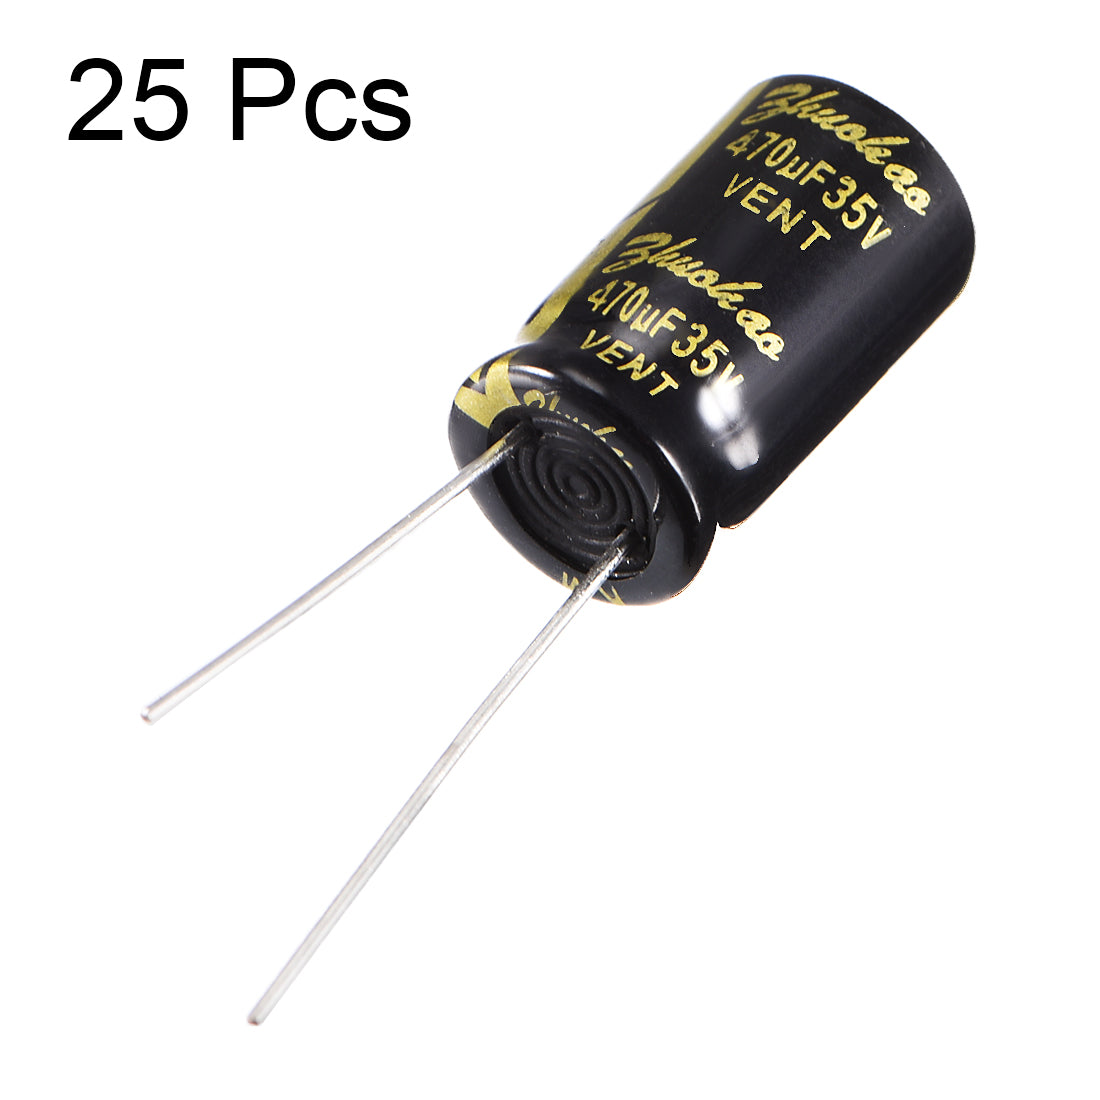 uxcell Uxcell Aluminum Radial Electrolytic Capacitor with 470uF 35V 105 Celsius Life 2000H 10 x 17 mm Black 25pcs